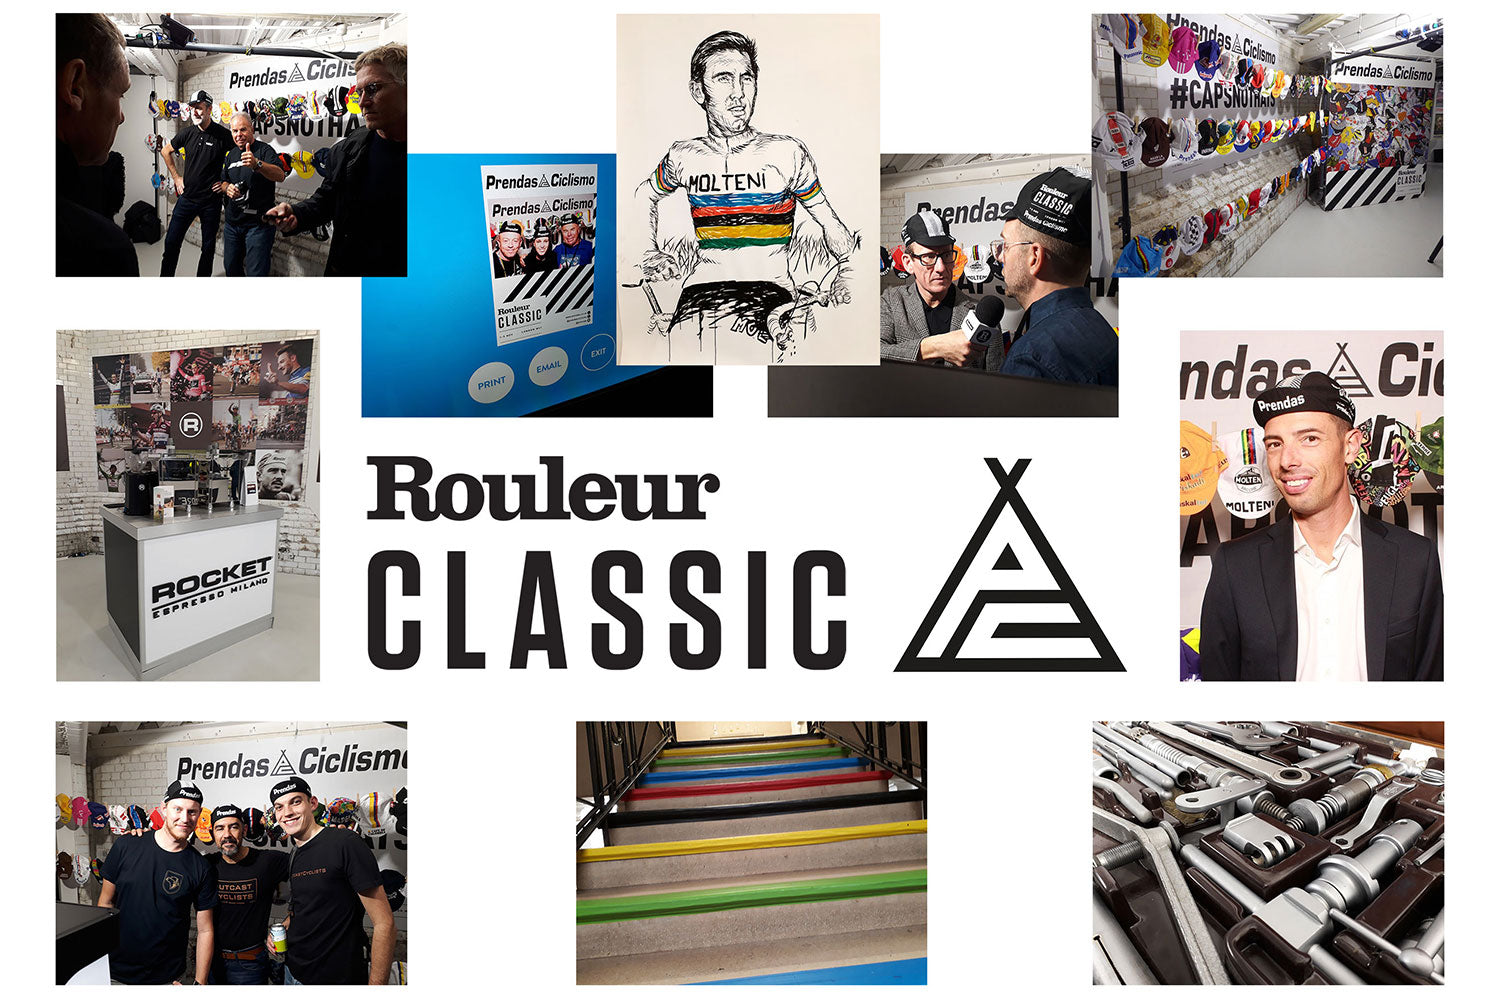 Bringing the Prendas cycling caps to the 2018 Rouleur Classic